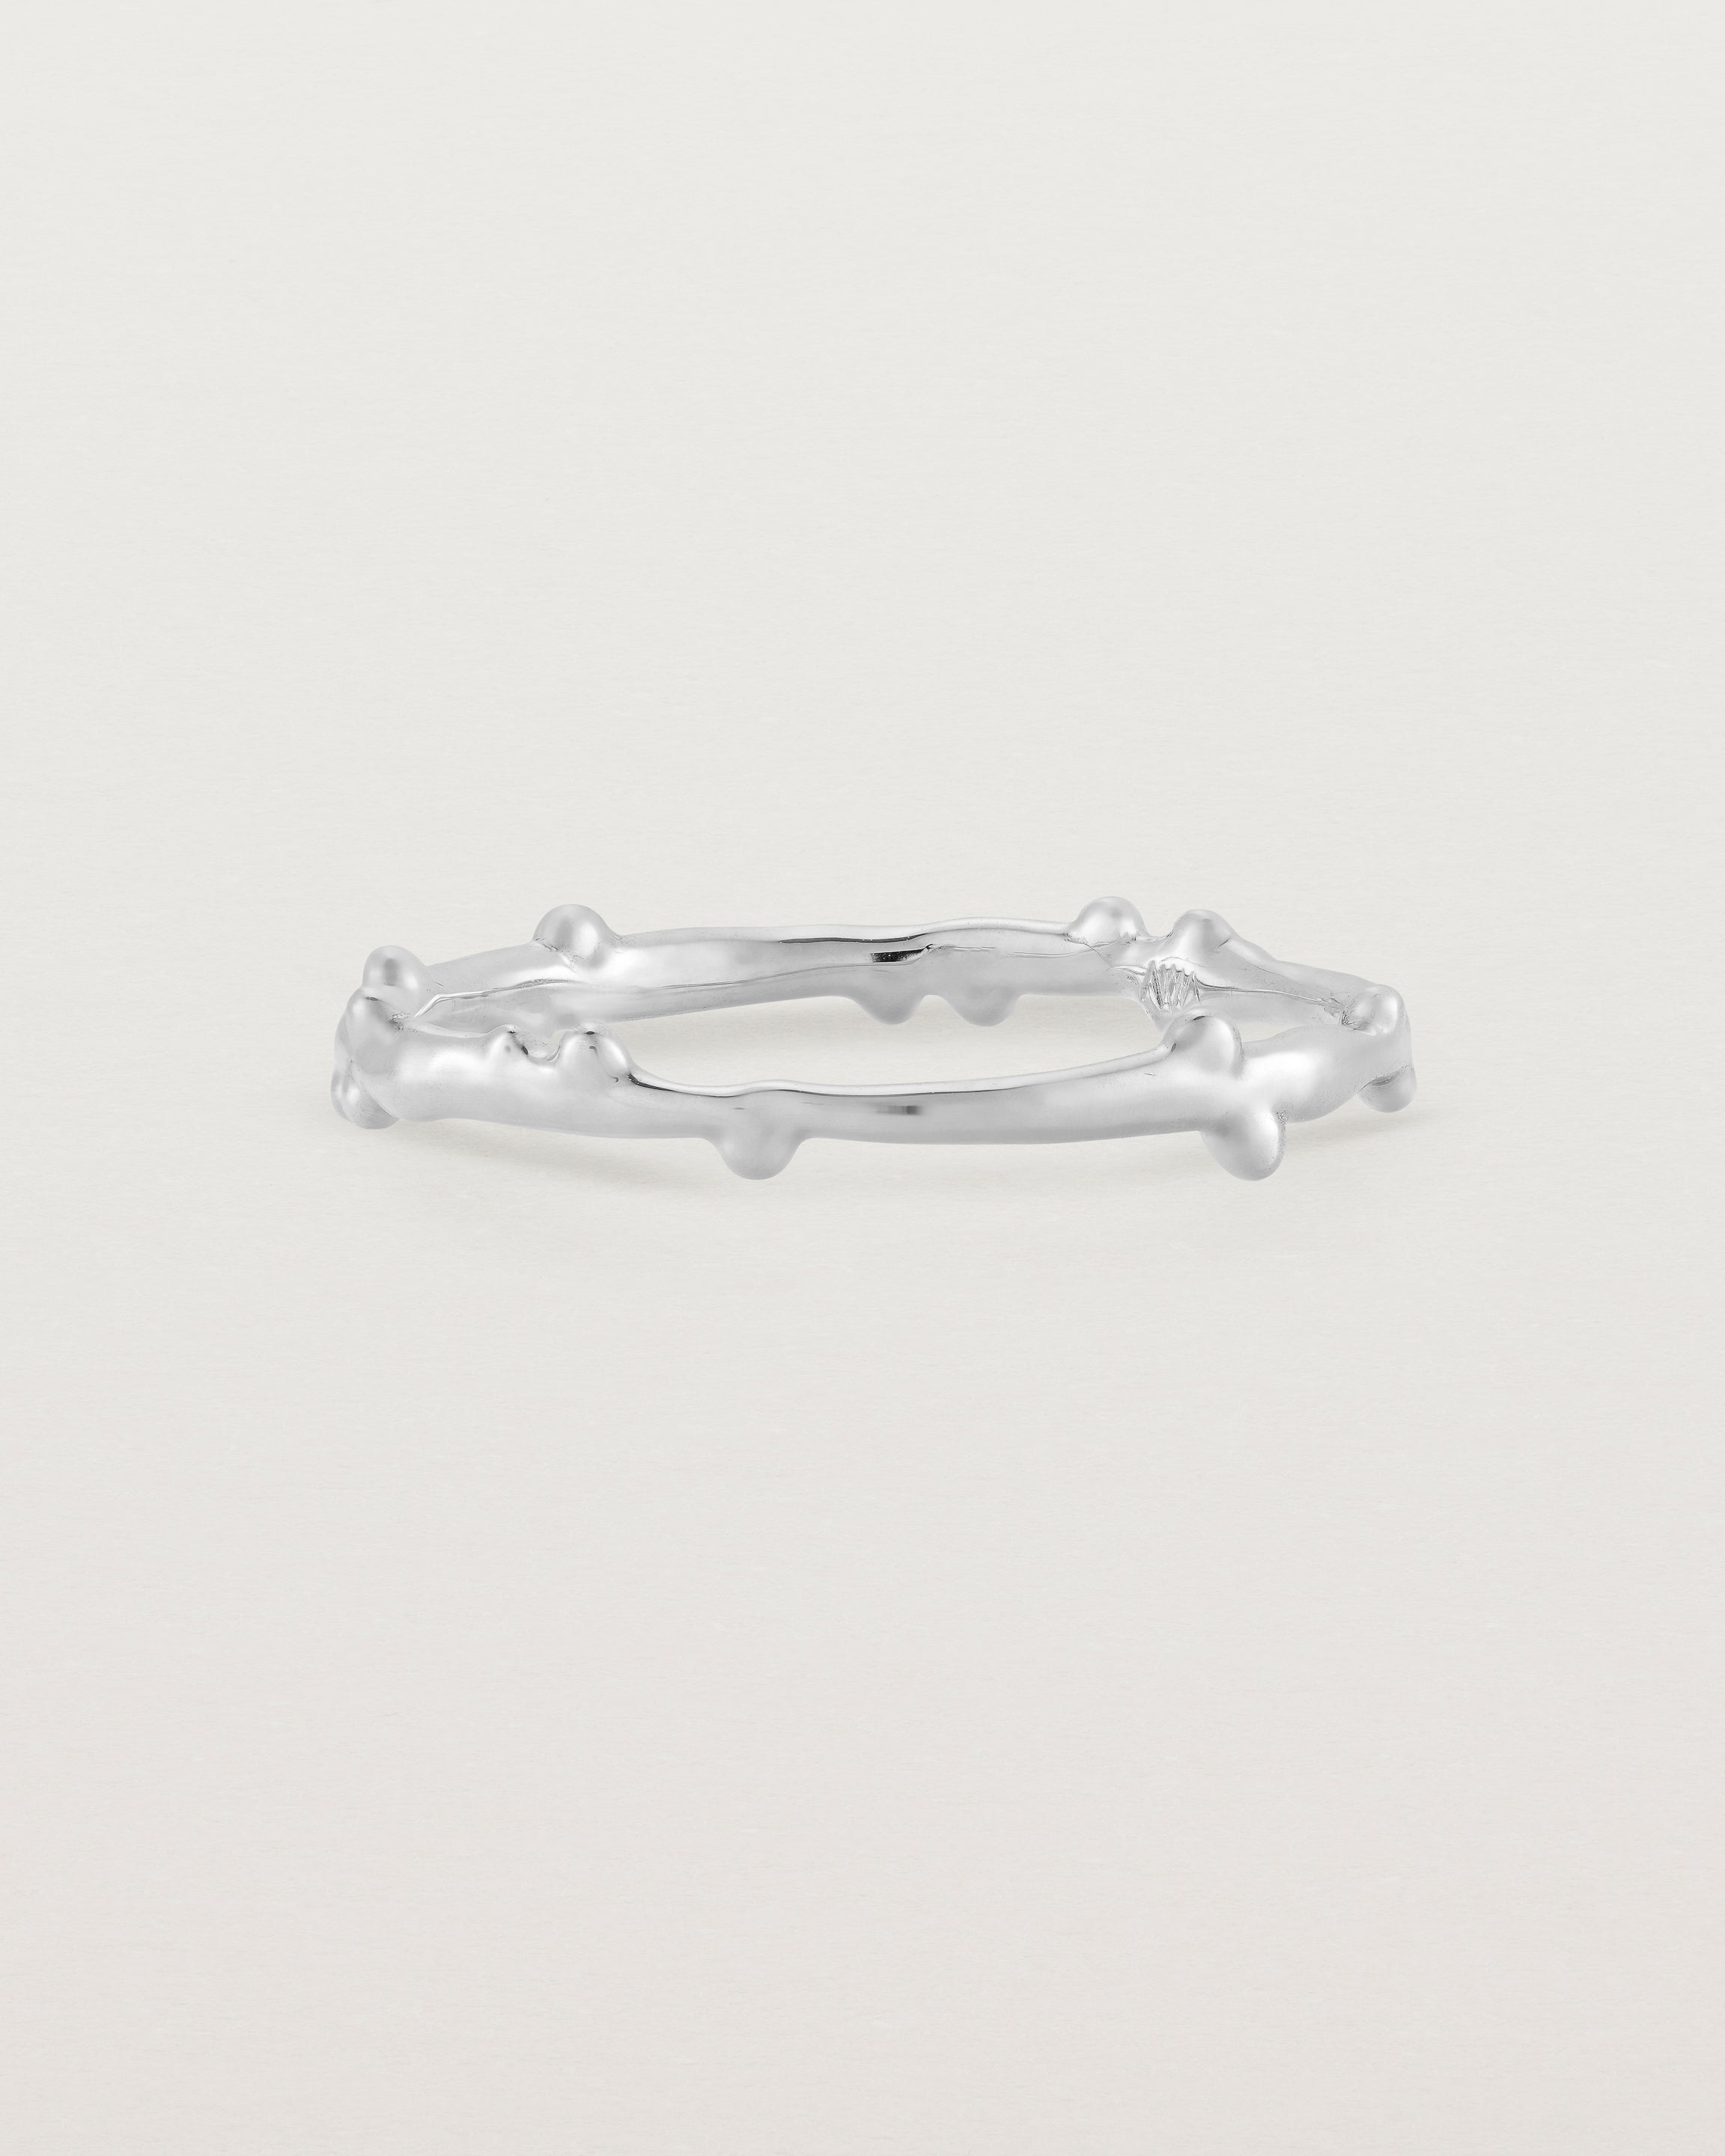 The Dotted Organic Stacking Ring in Sterling Silver.